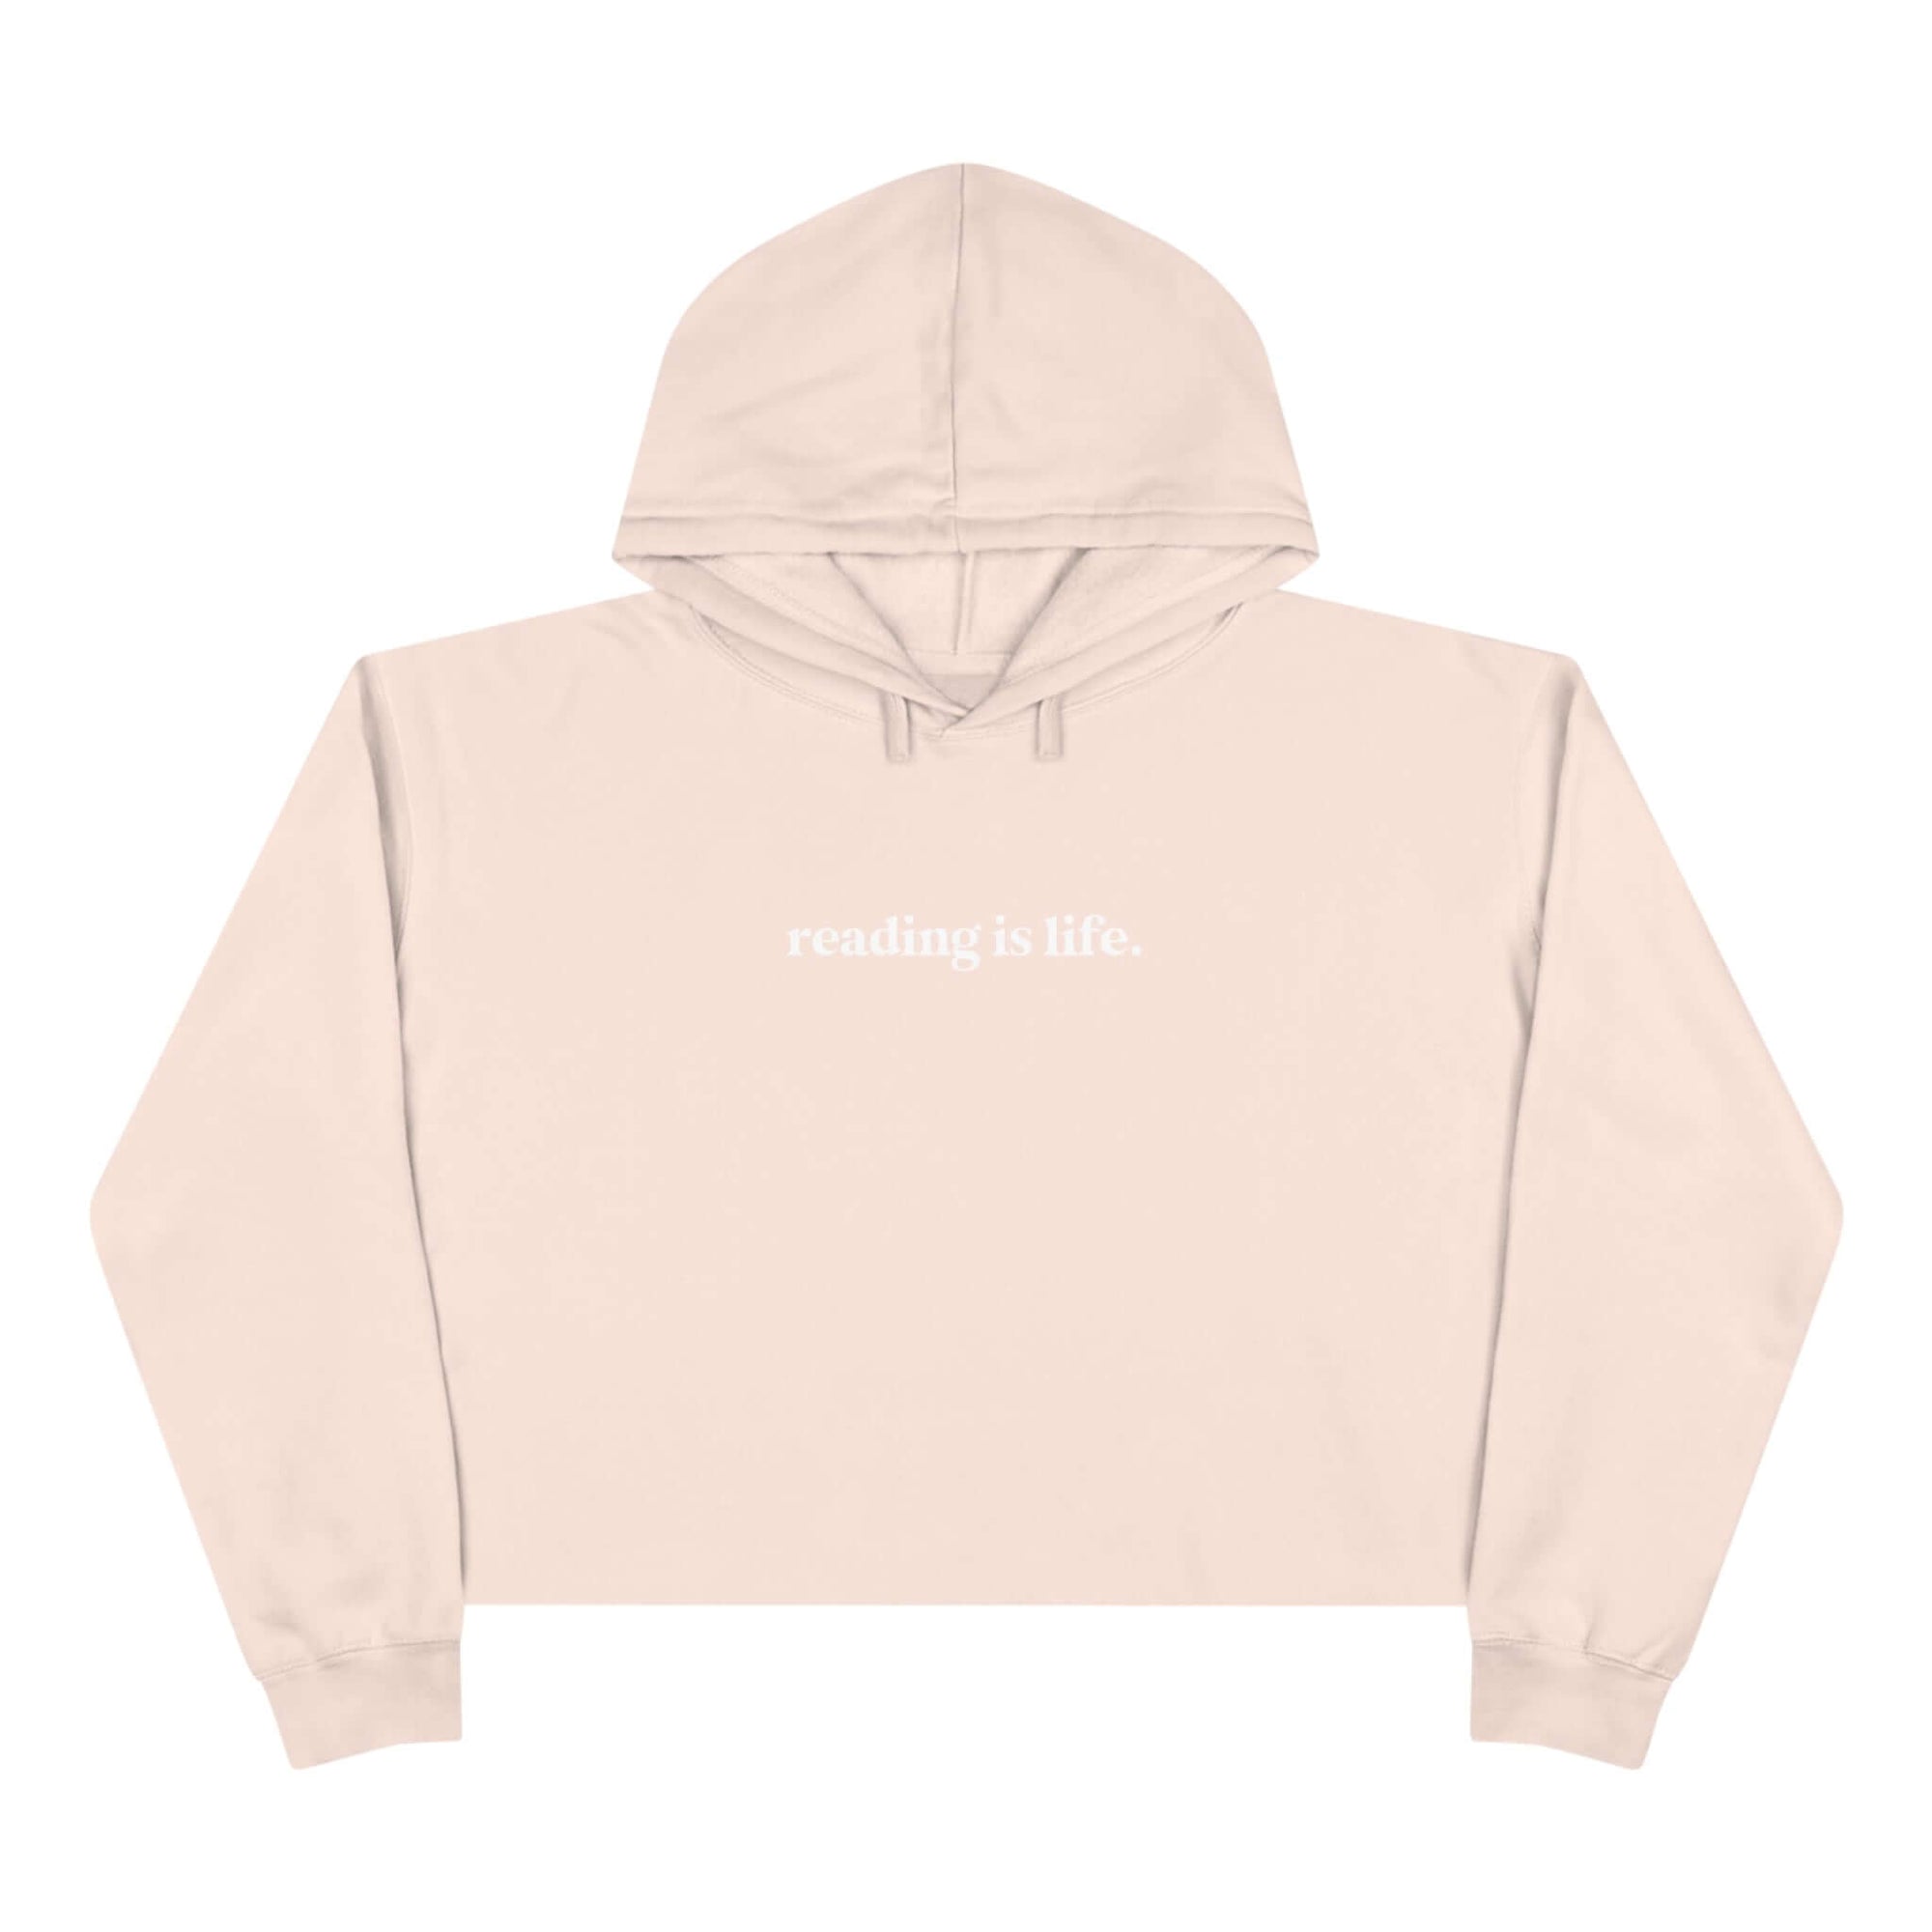 Hello Decodables | Reading Is Life Cropped Hoodie